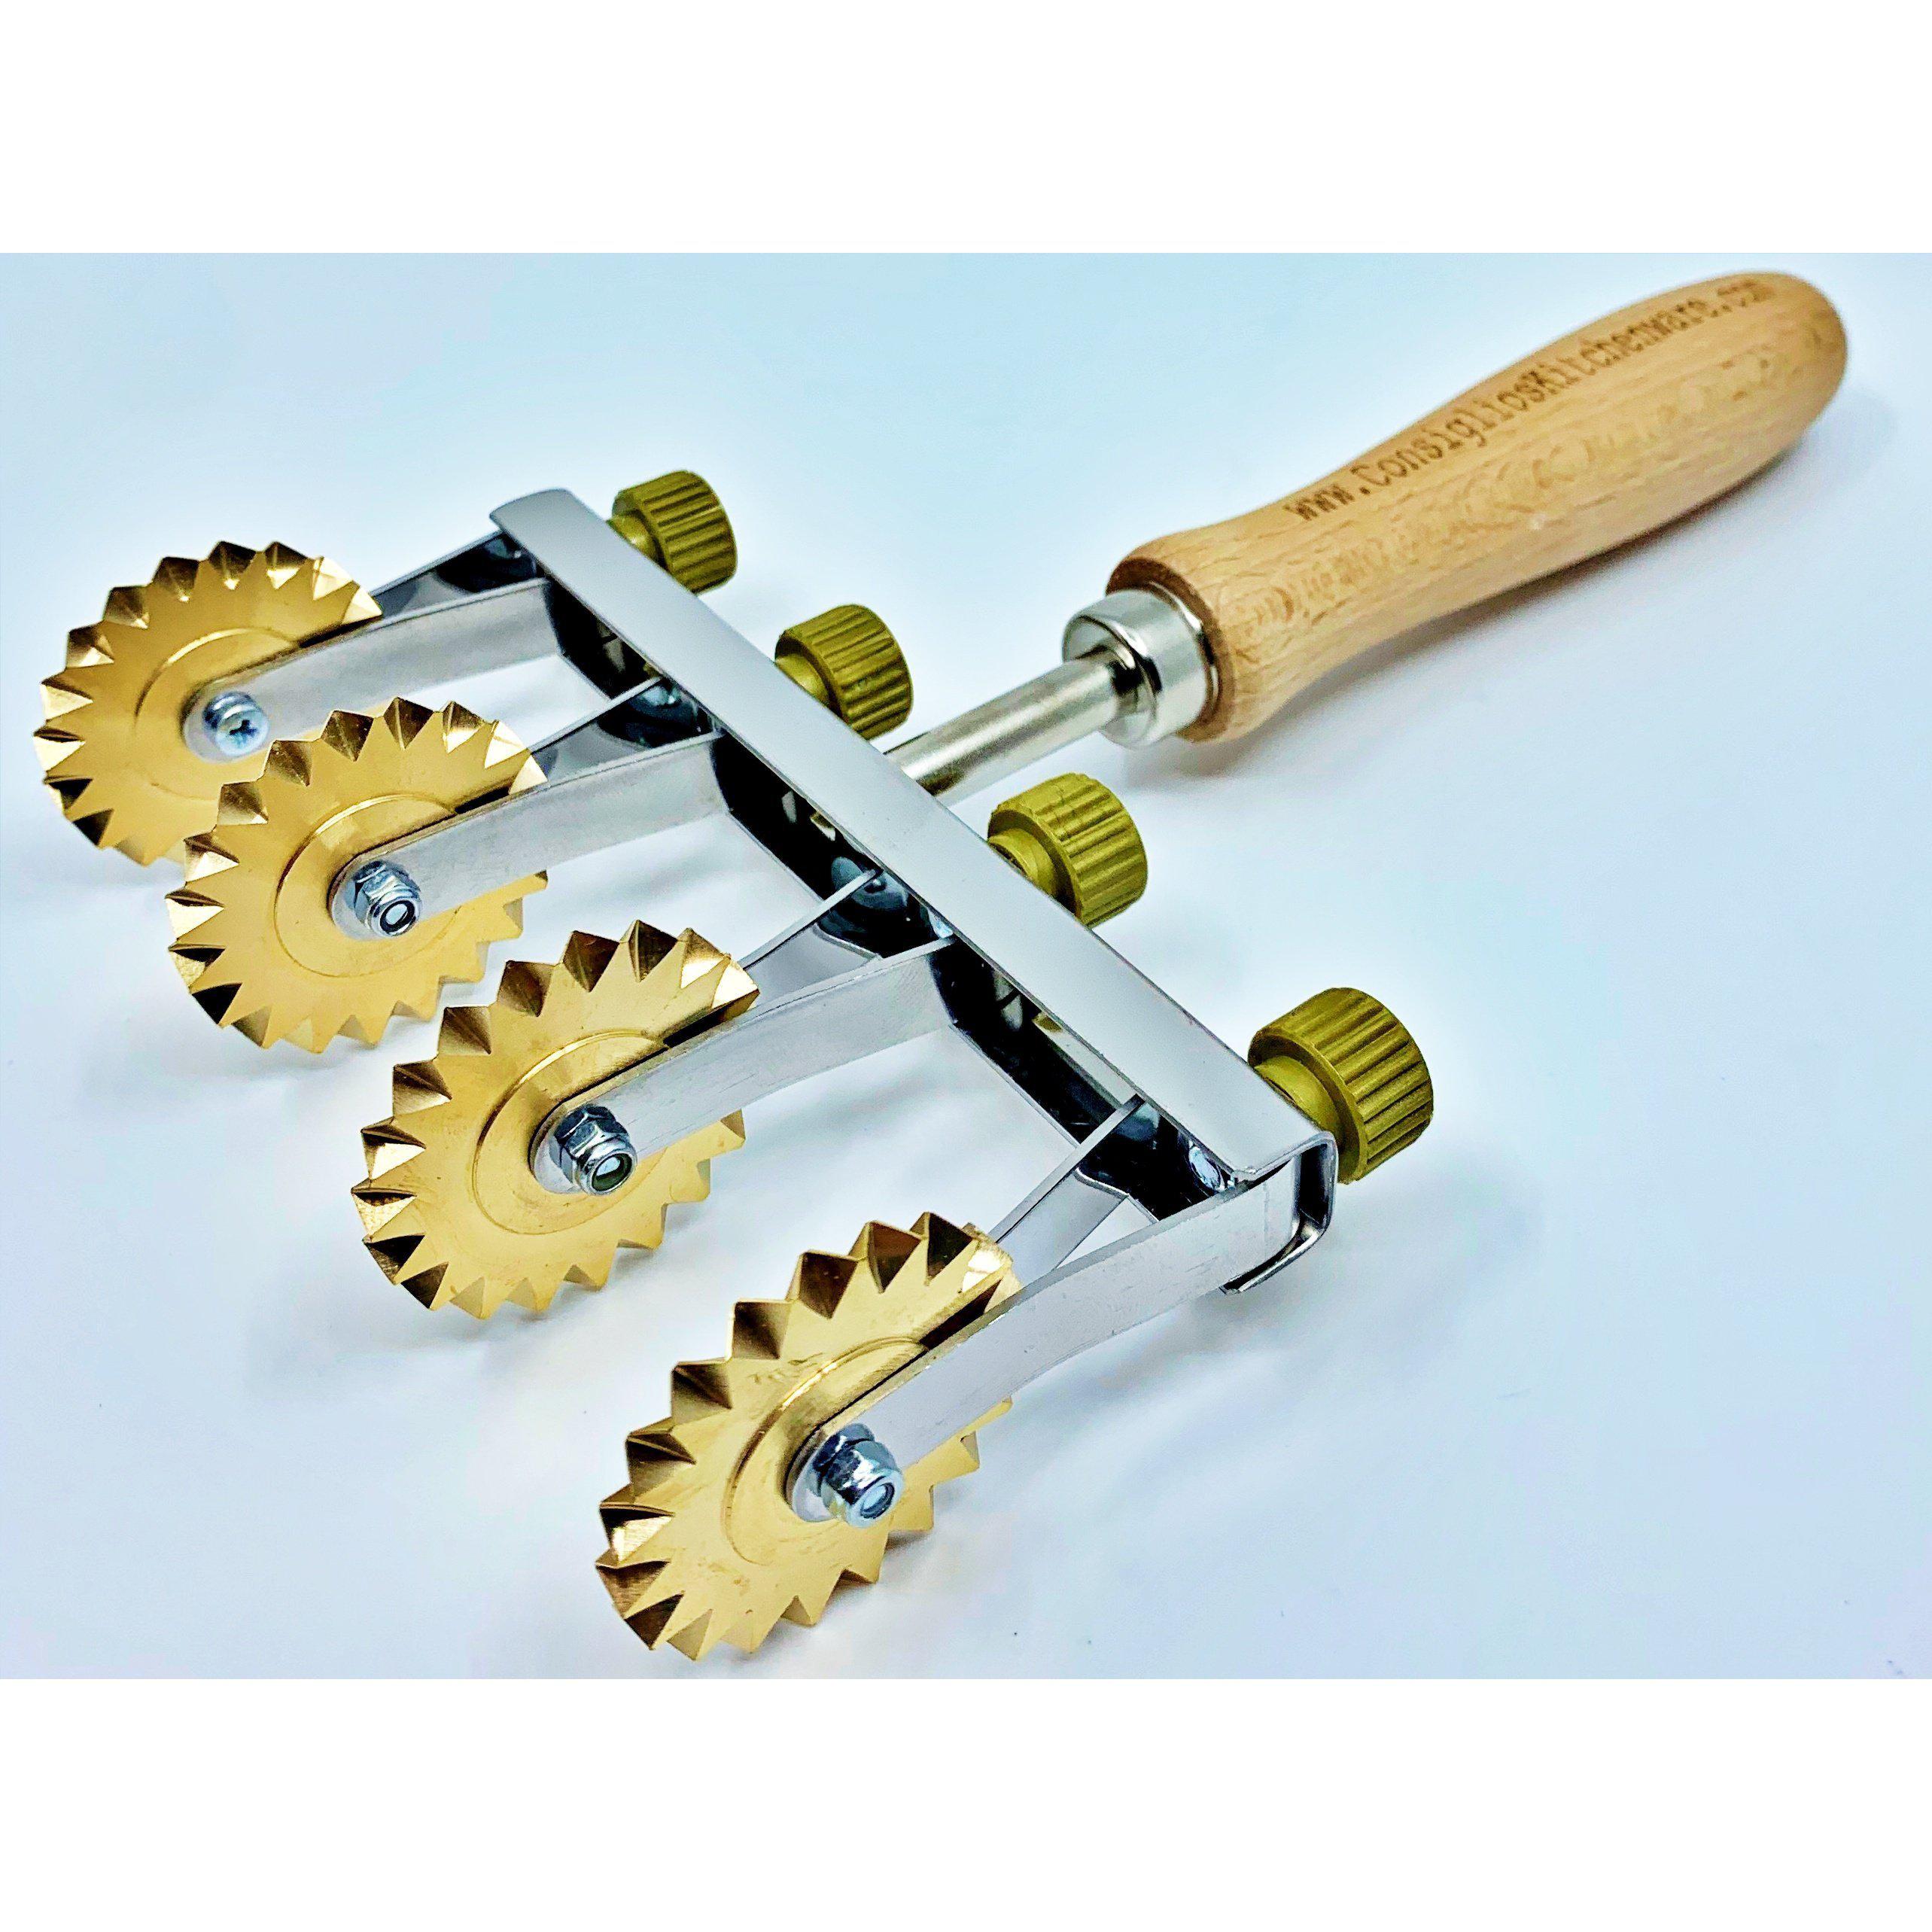 Brass Adjustable Fluted Pastry and Pasta Cutter with 4 Wheels USA